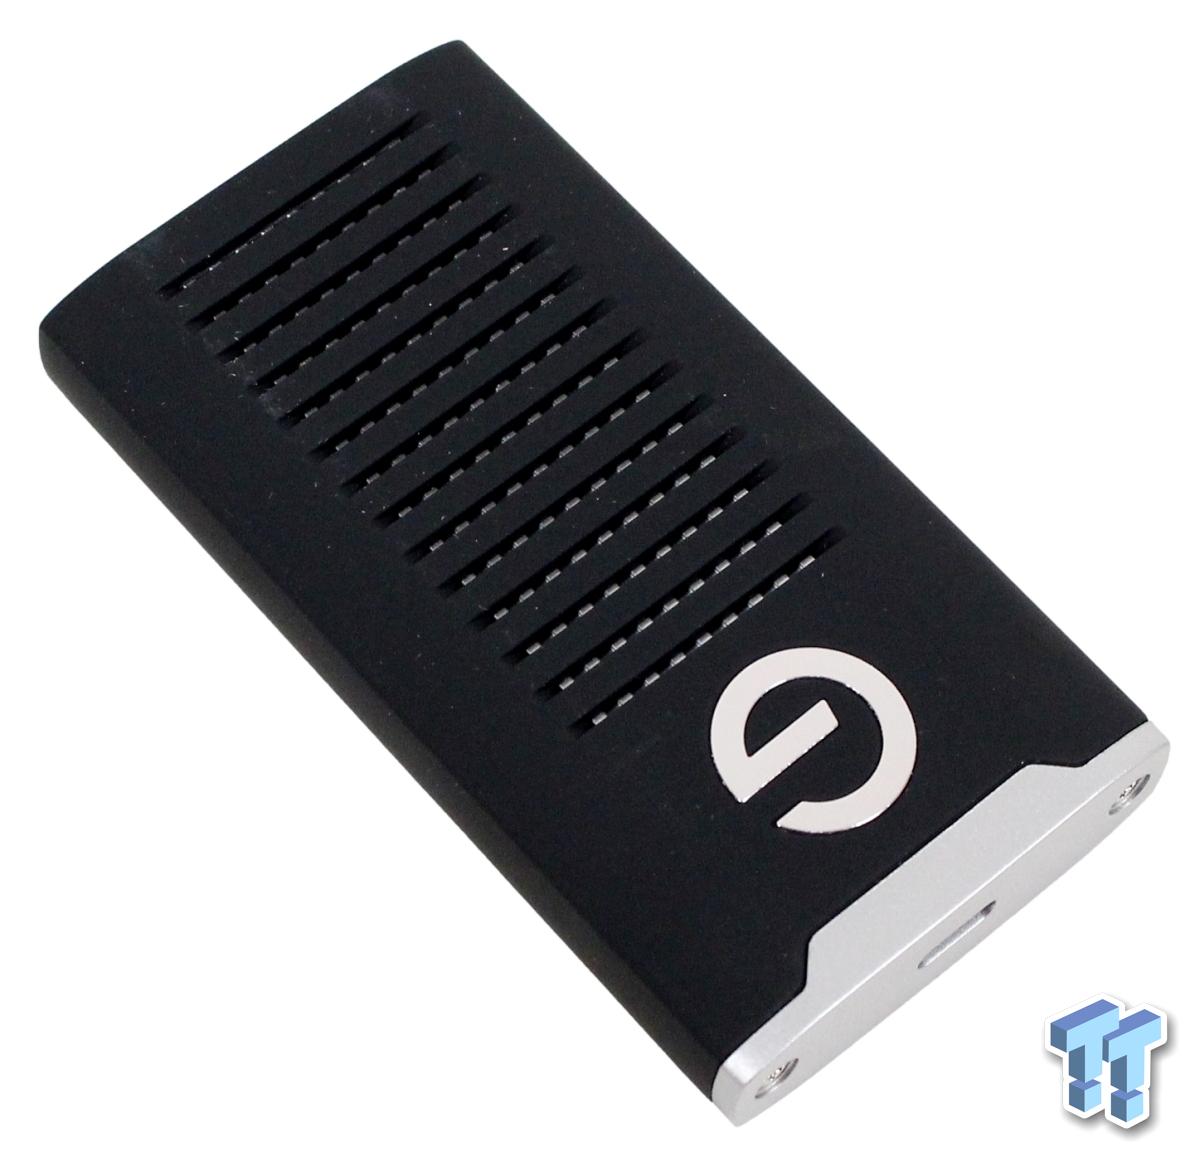 SanDisk Professional G-DRIVE SSD 2TB Portable Review